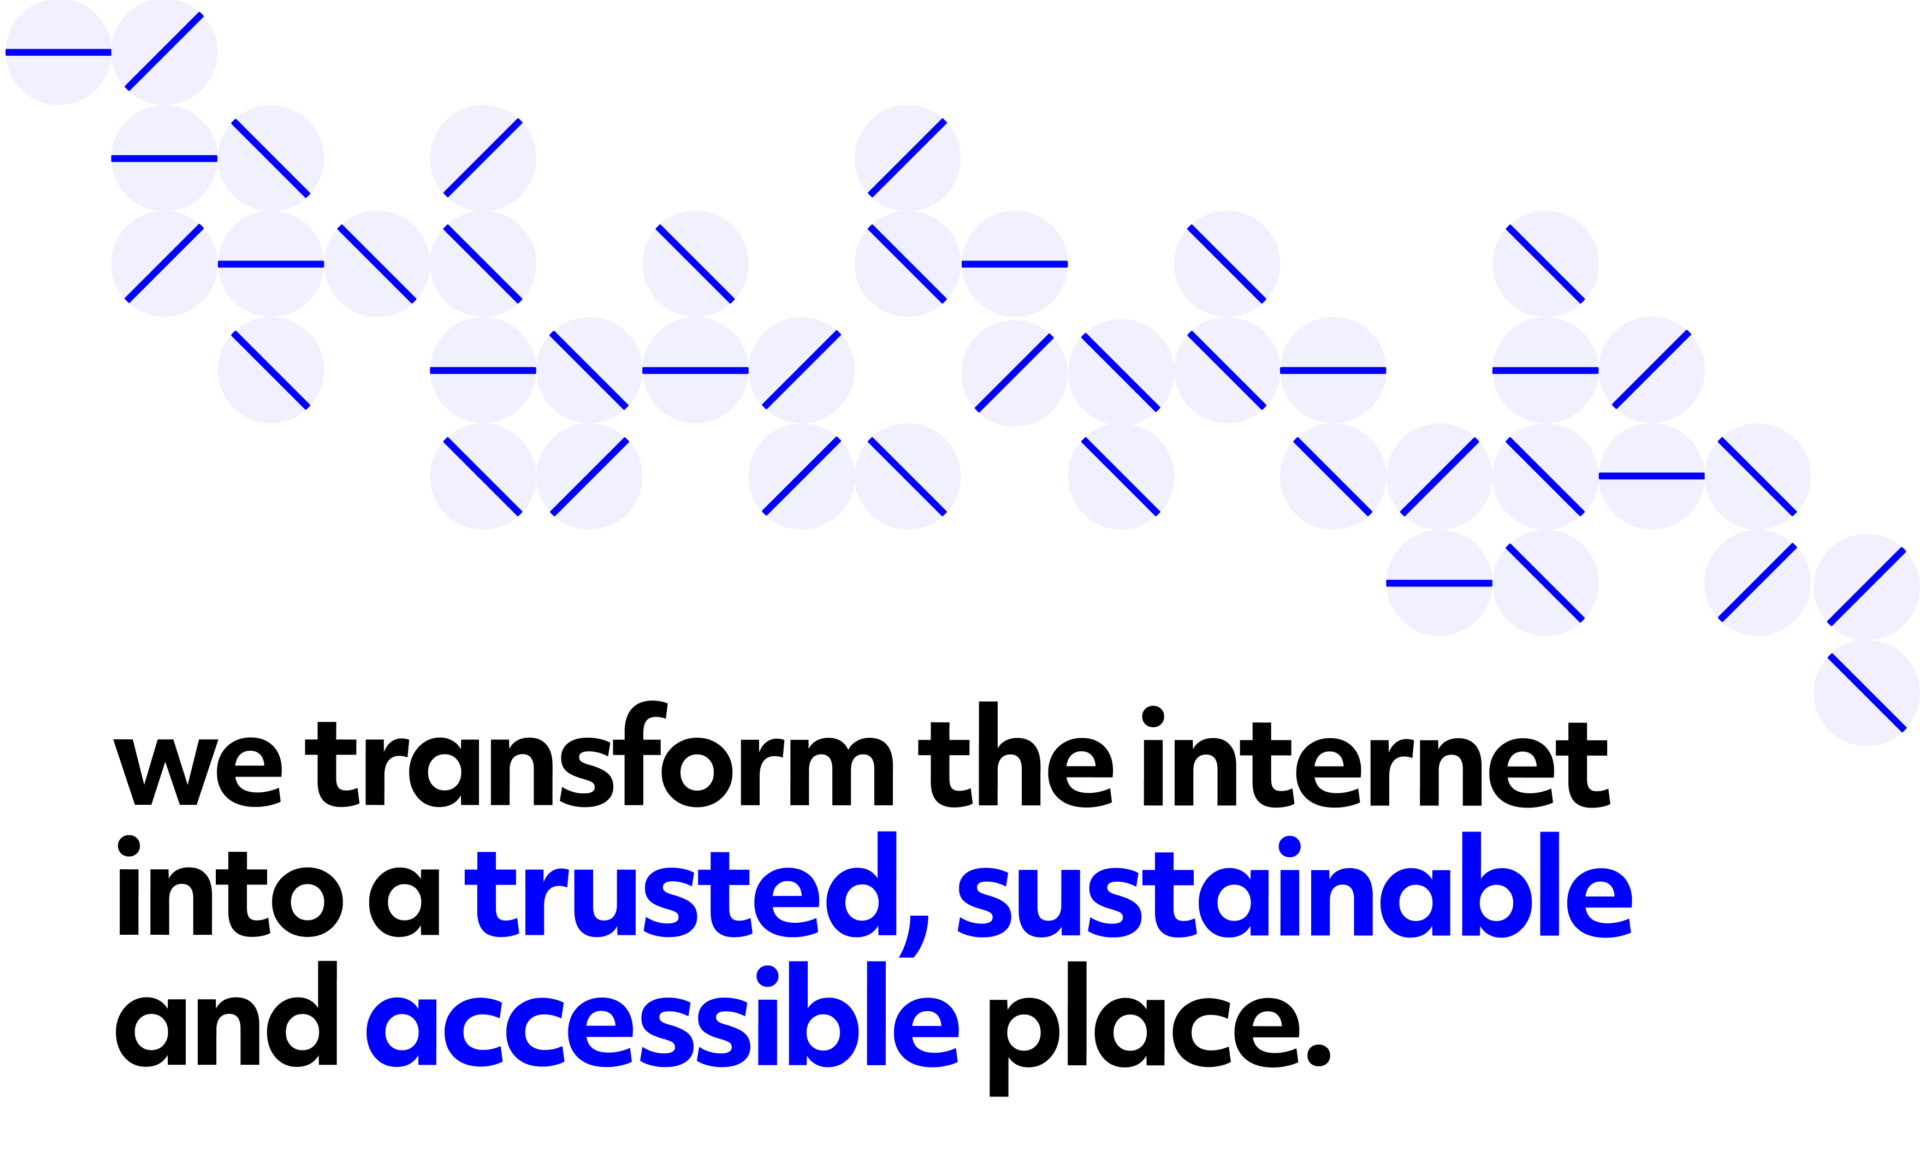 Slide with text: "we transform the internet to a trusted, sustainable and accessible place."